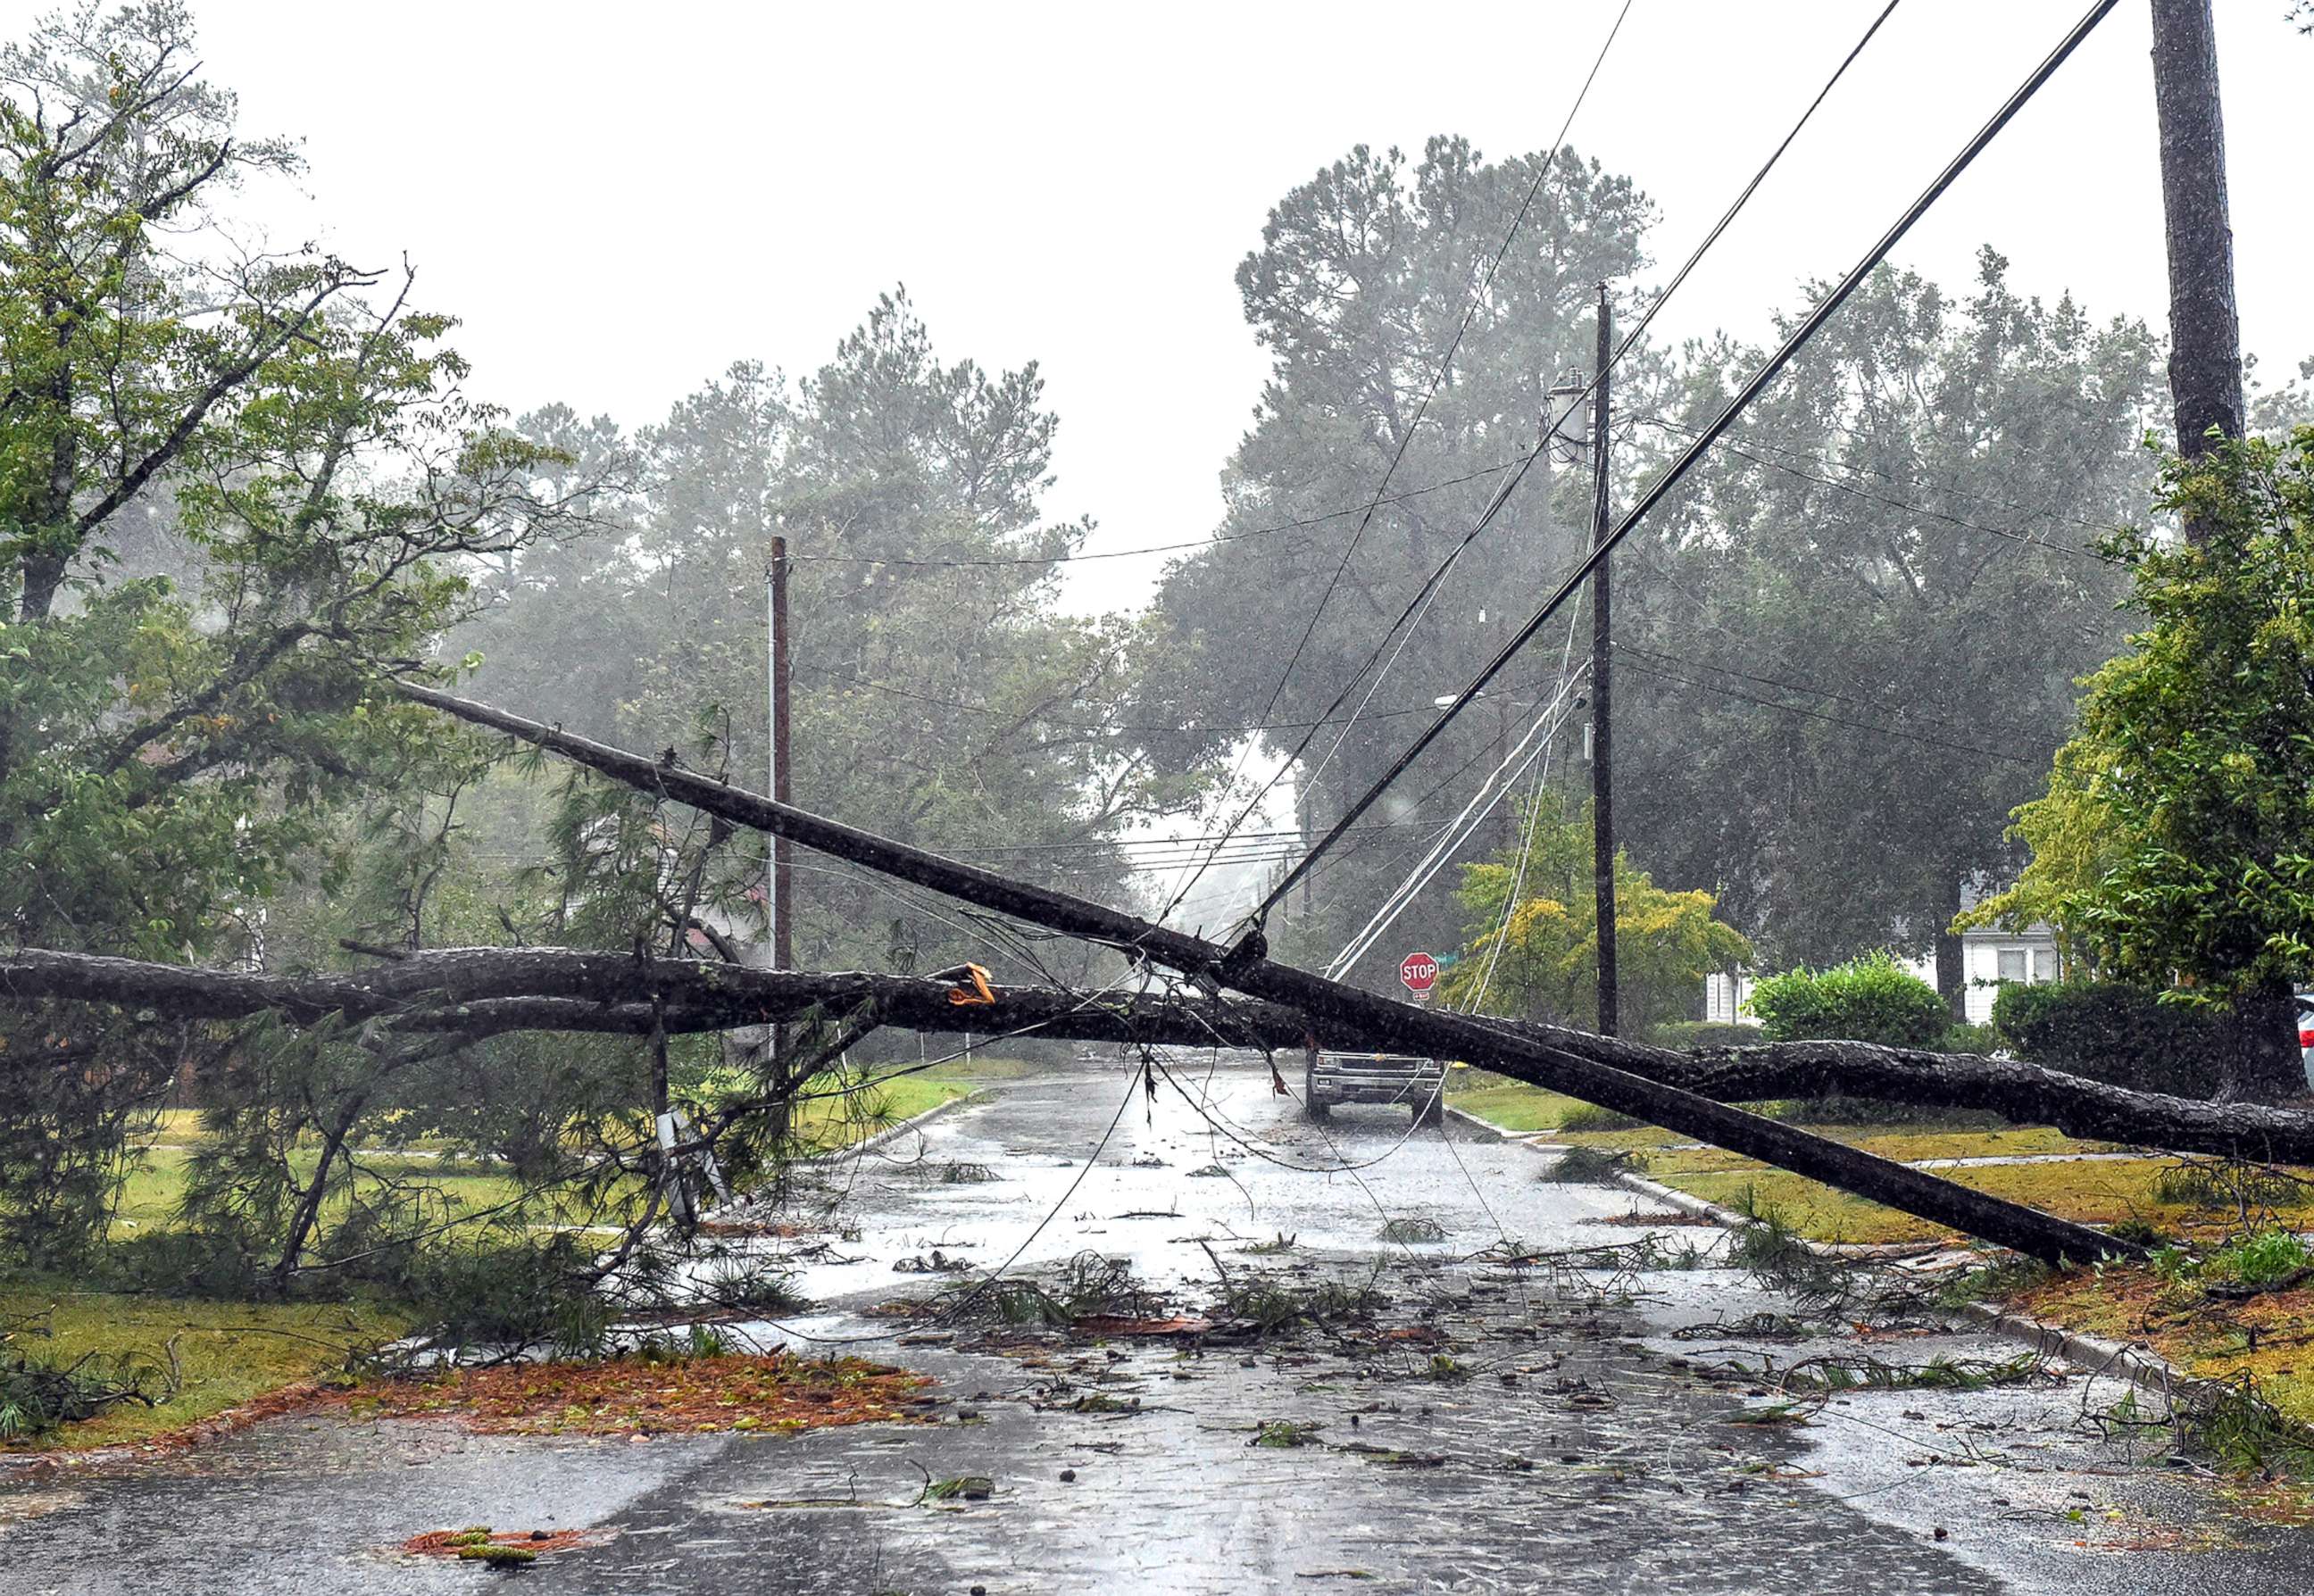 PHOTO: Tropical Storm Florence continues to unleash massive amount of rain on Lumberton, N.C., on Sept. 15, 2018, causing downed trees and power lines and minor flooding in areas.